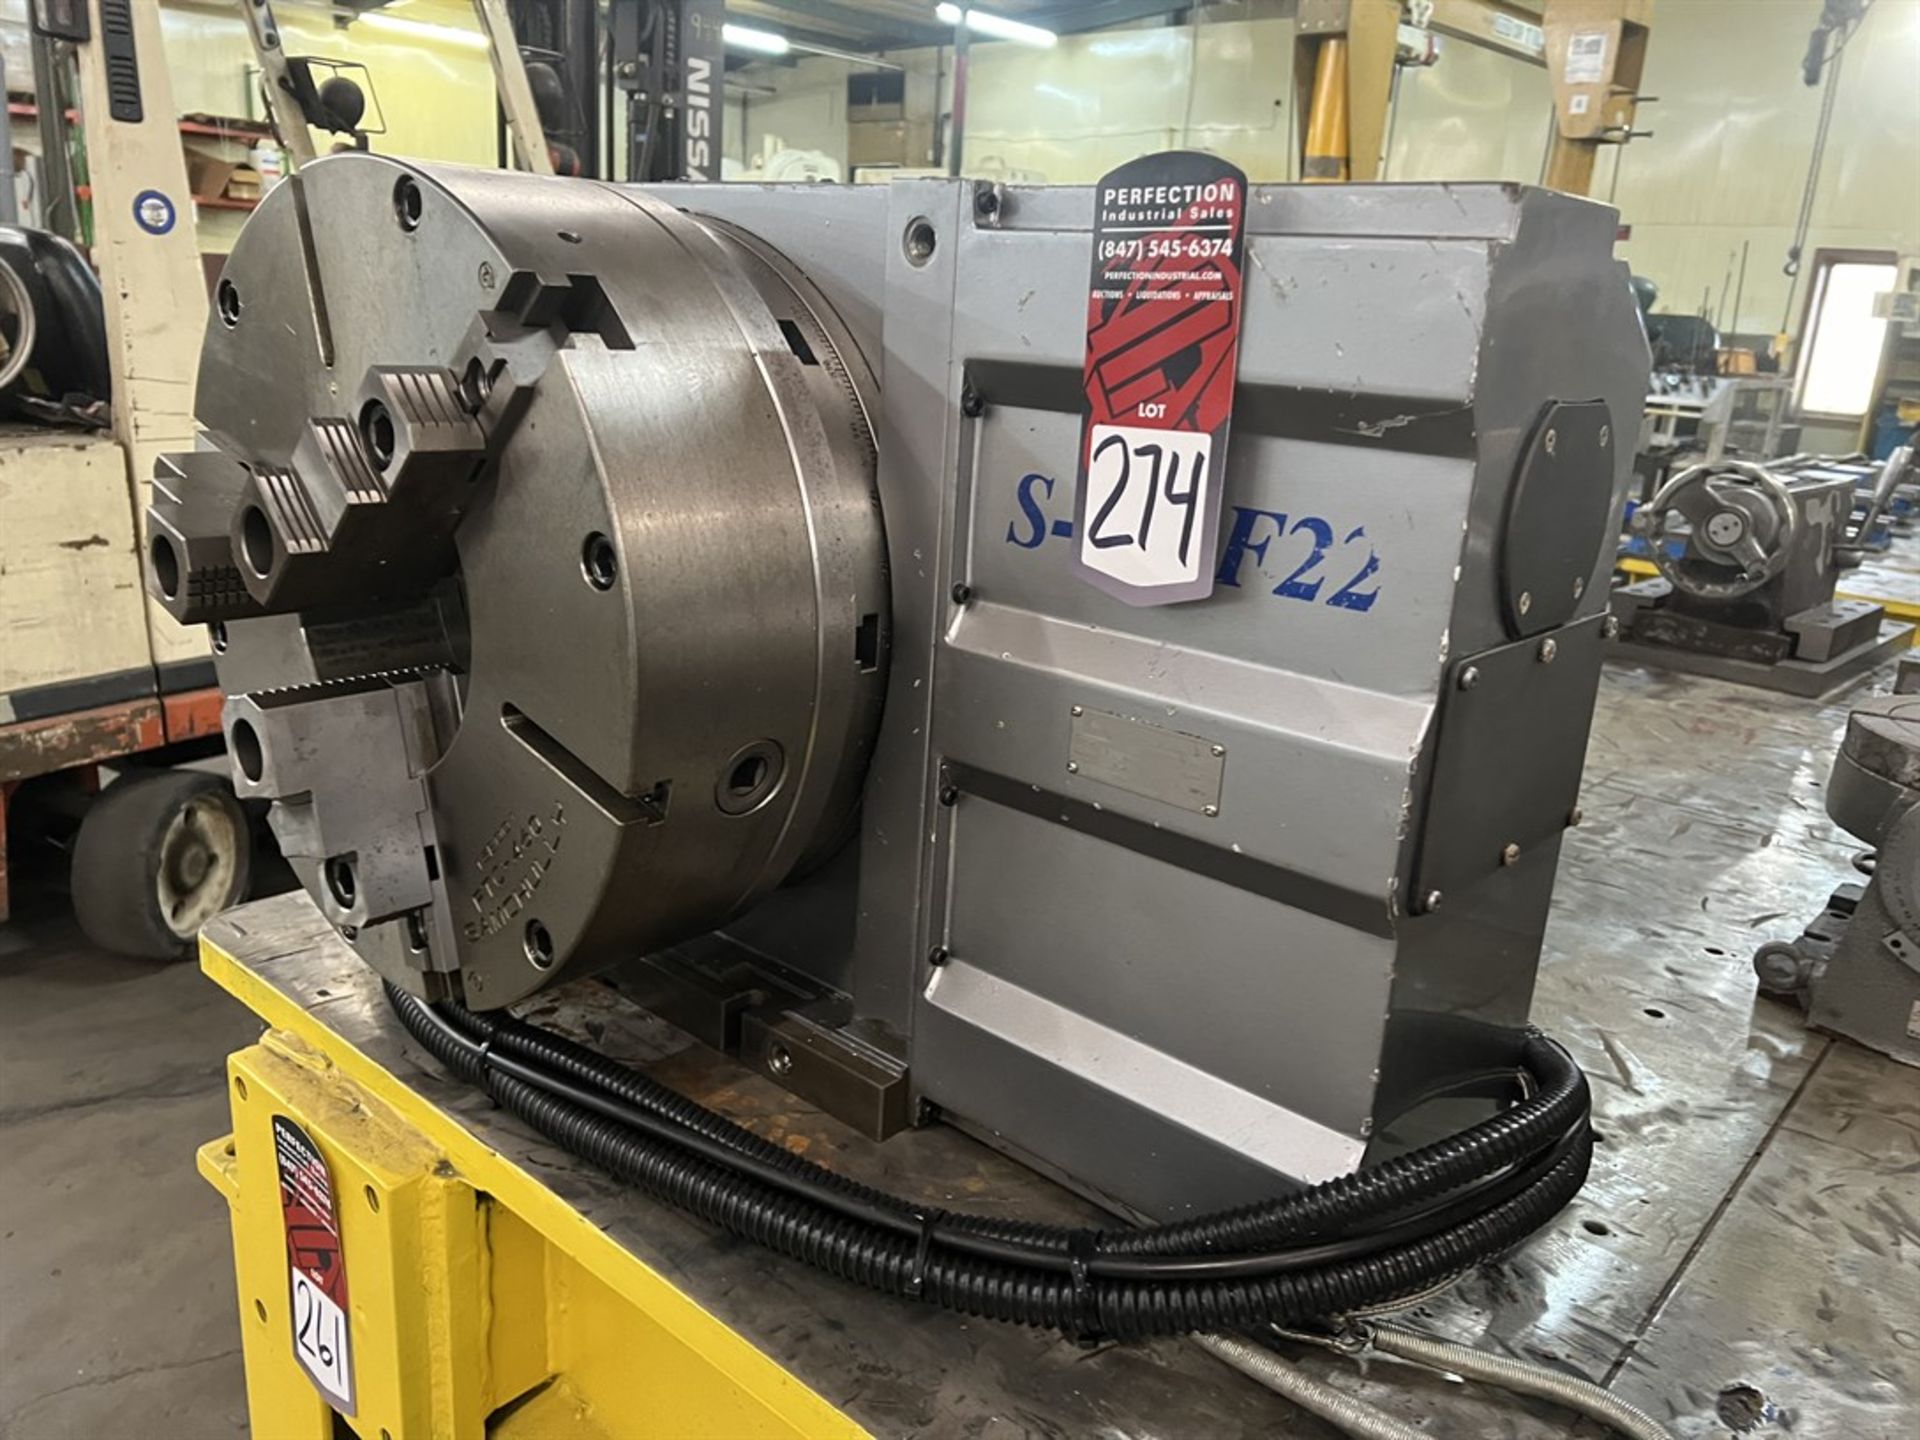 SAMCHULLY S-430F22 4th Axis Rotary Table, s/n 1210001, w/ 18" 3-Jaw Chuck w/ 7-1/2" Hole (Machine - Image 4 of 6